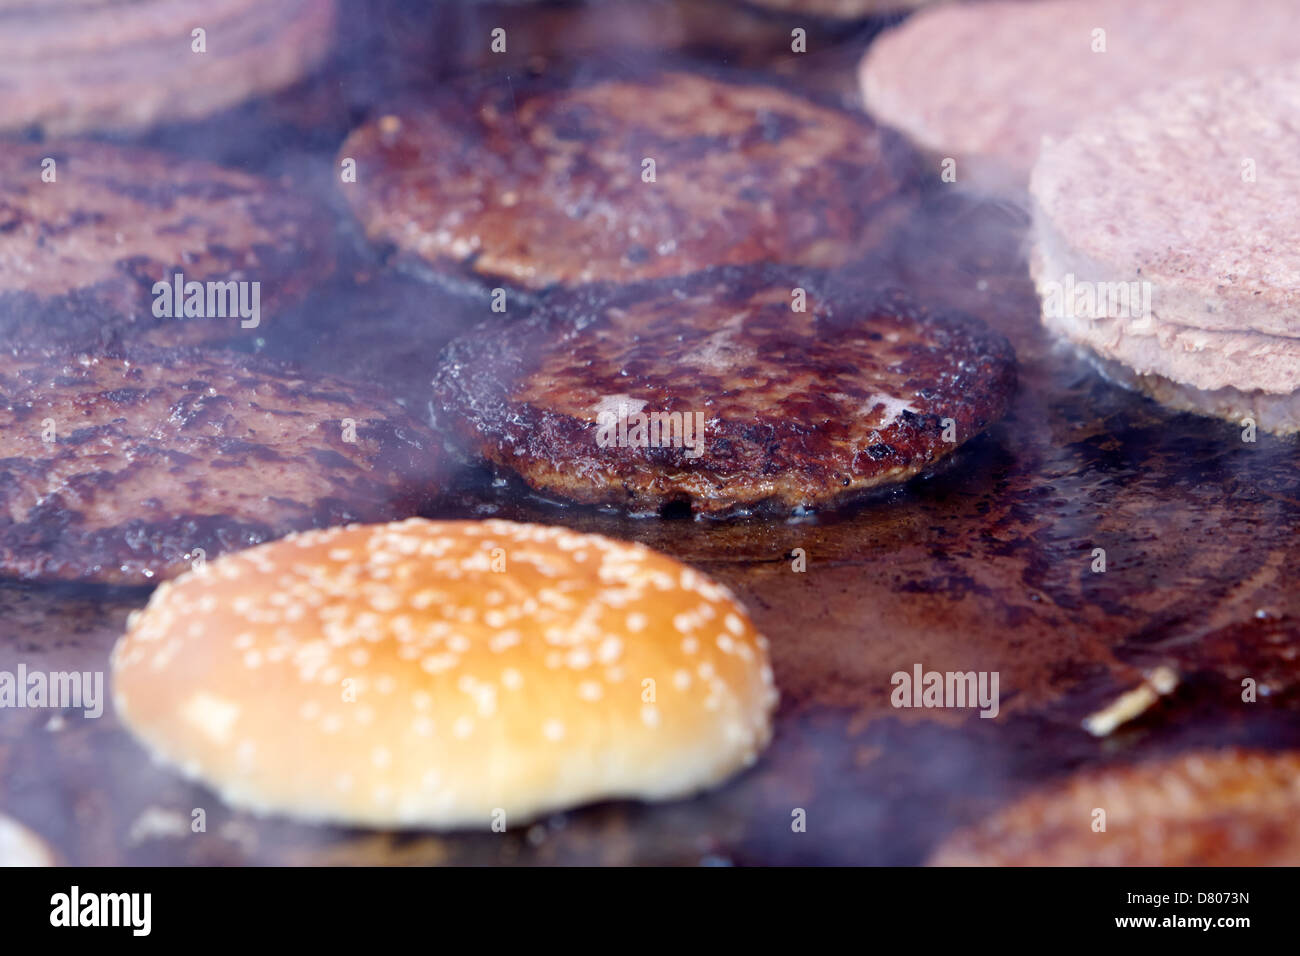 raw and cooked processed hamburgers on a commercial flat grill at an outdoor event Stock Photo